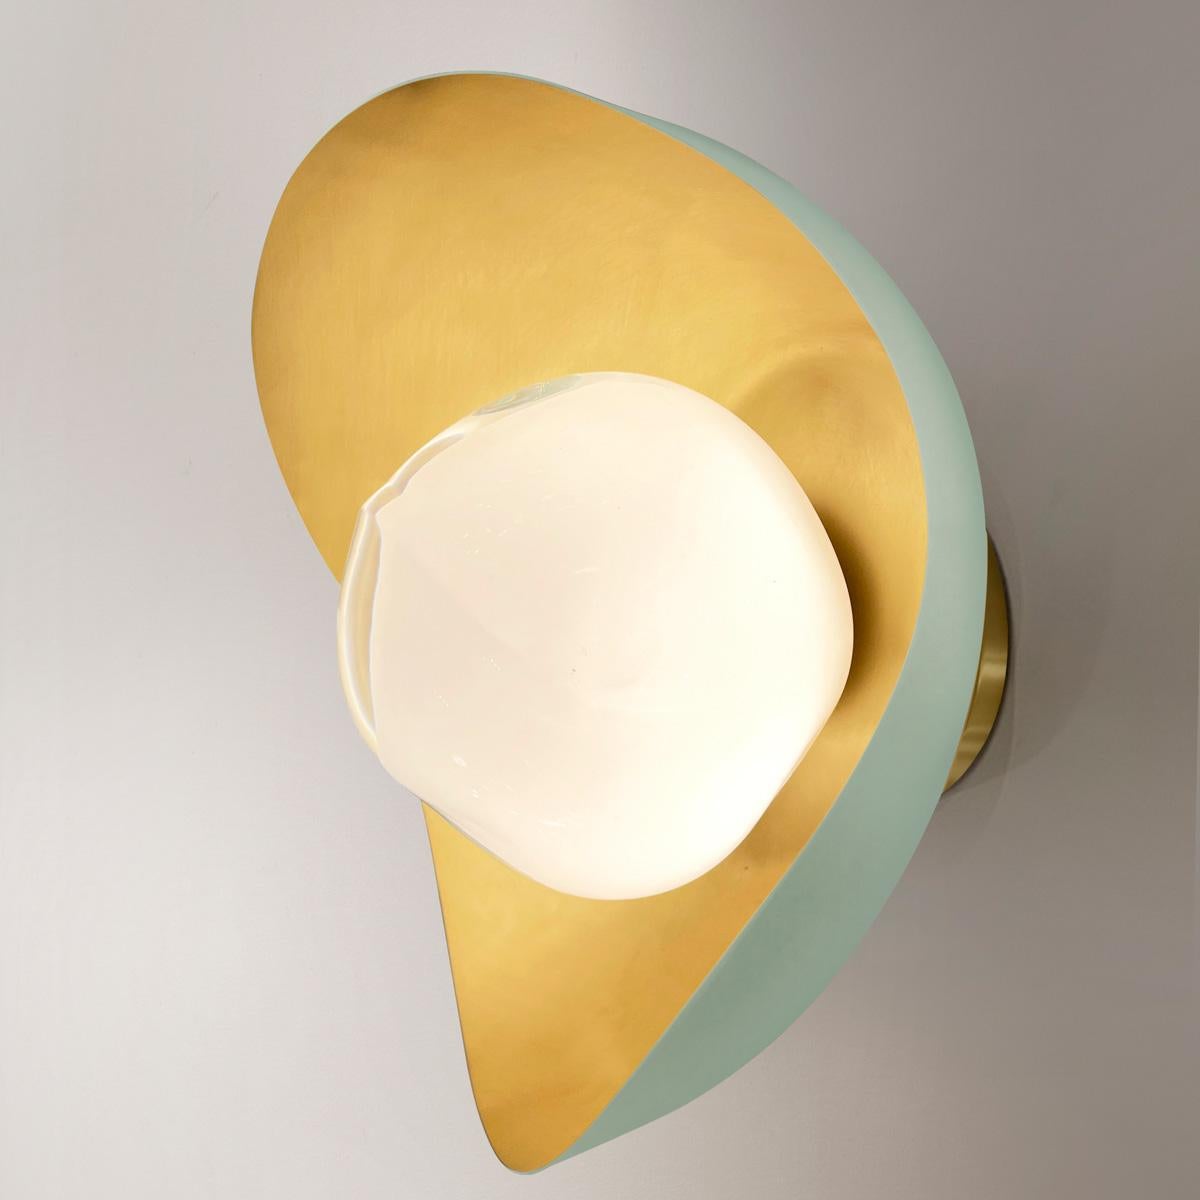 The Perla wall light features an organic brass shell nestling our Sfera glass handblown in Tuscany. The first images show the fixture with a satin brass interior and Lerici Acqua exterior finish-subsequent pictures show it in a selection of